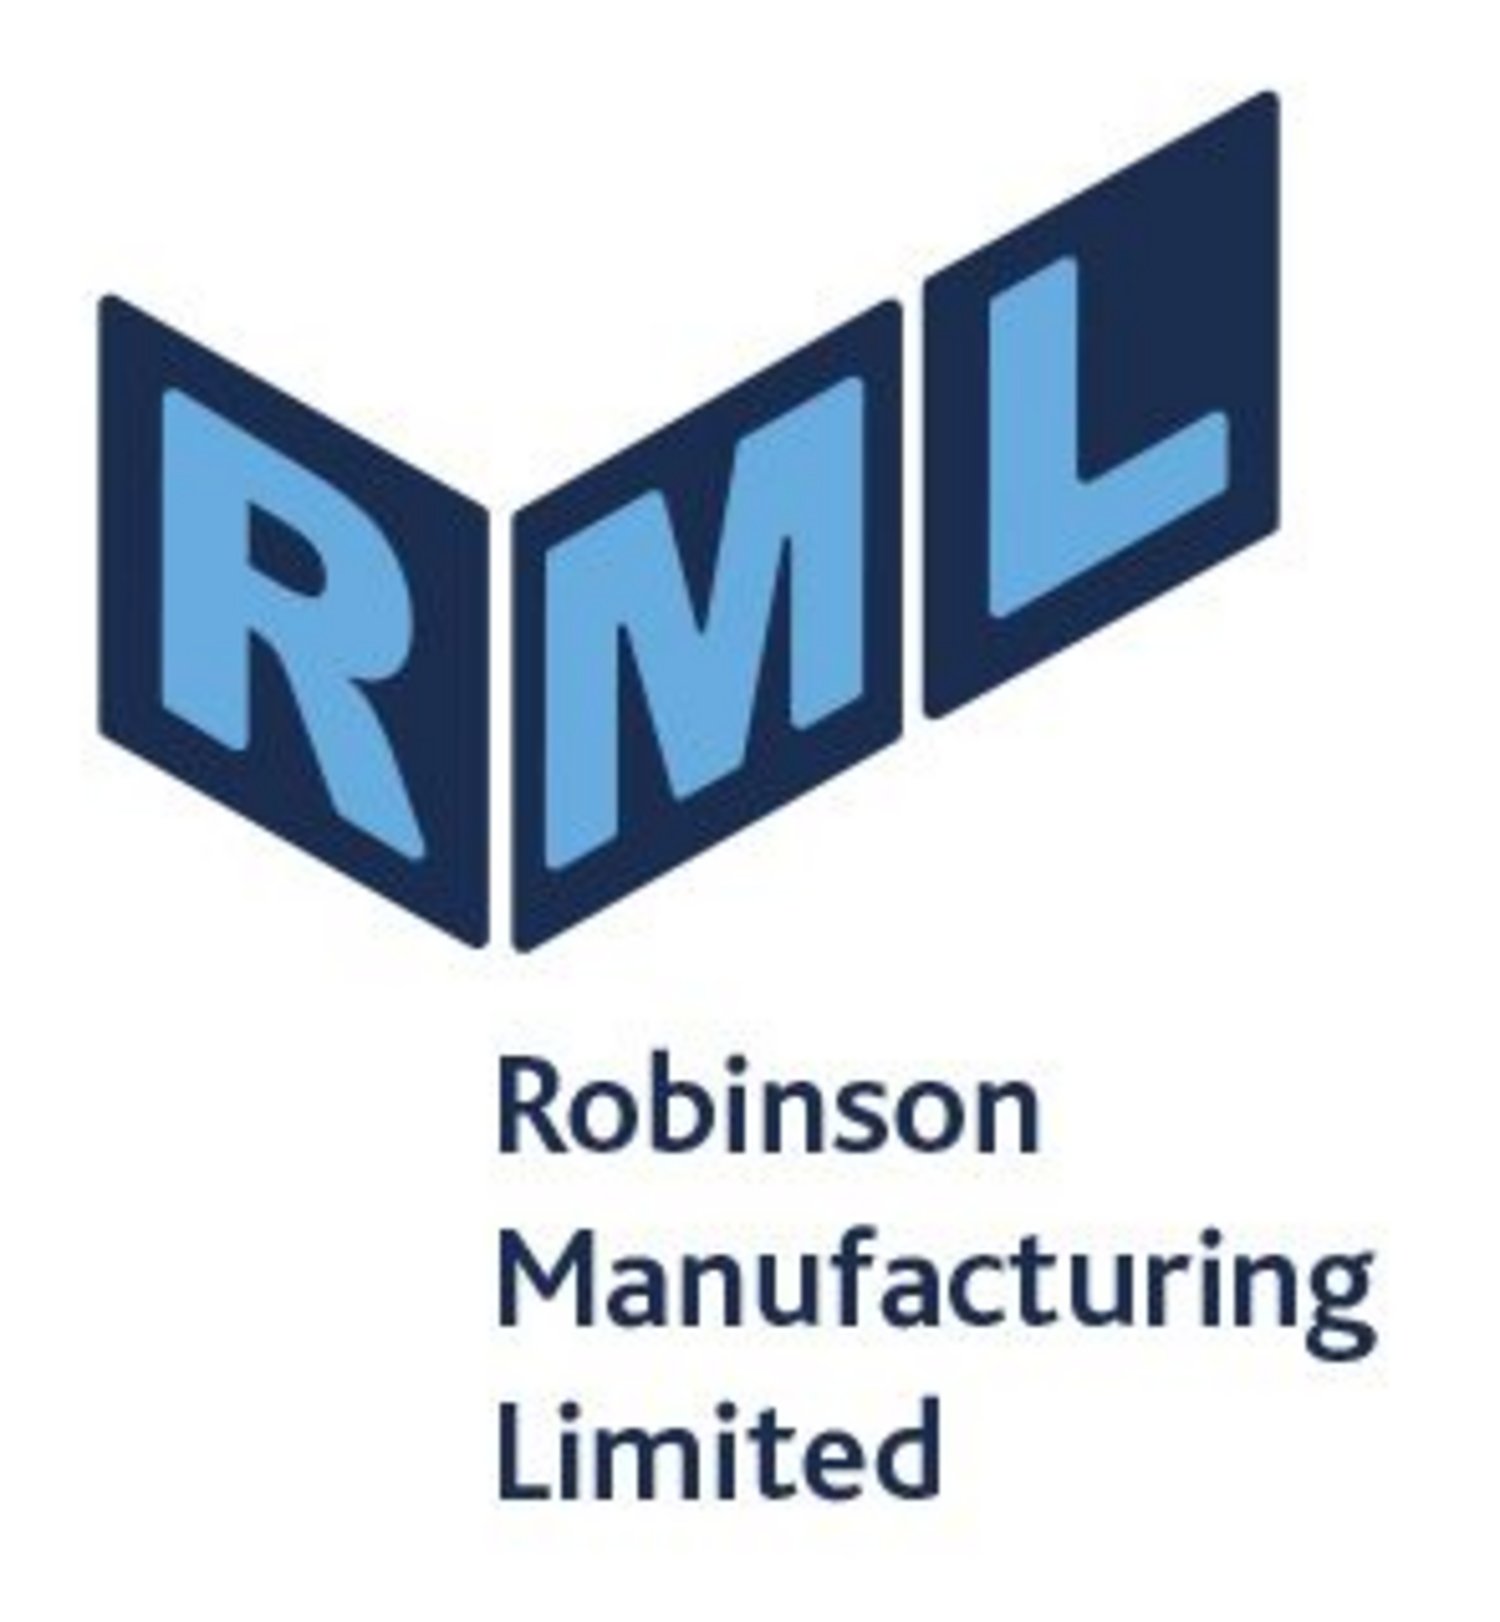 Robinson Manufacturing Limited